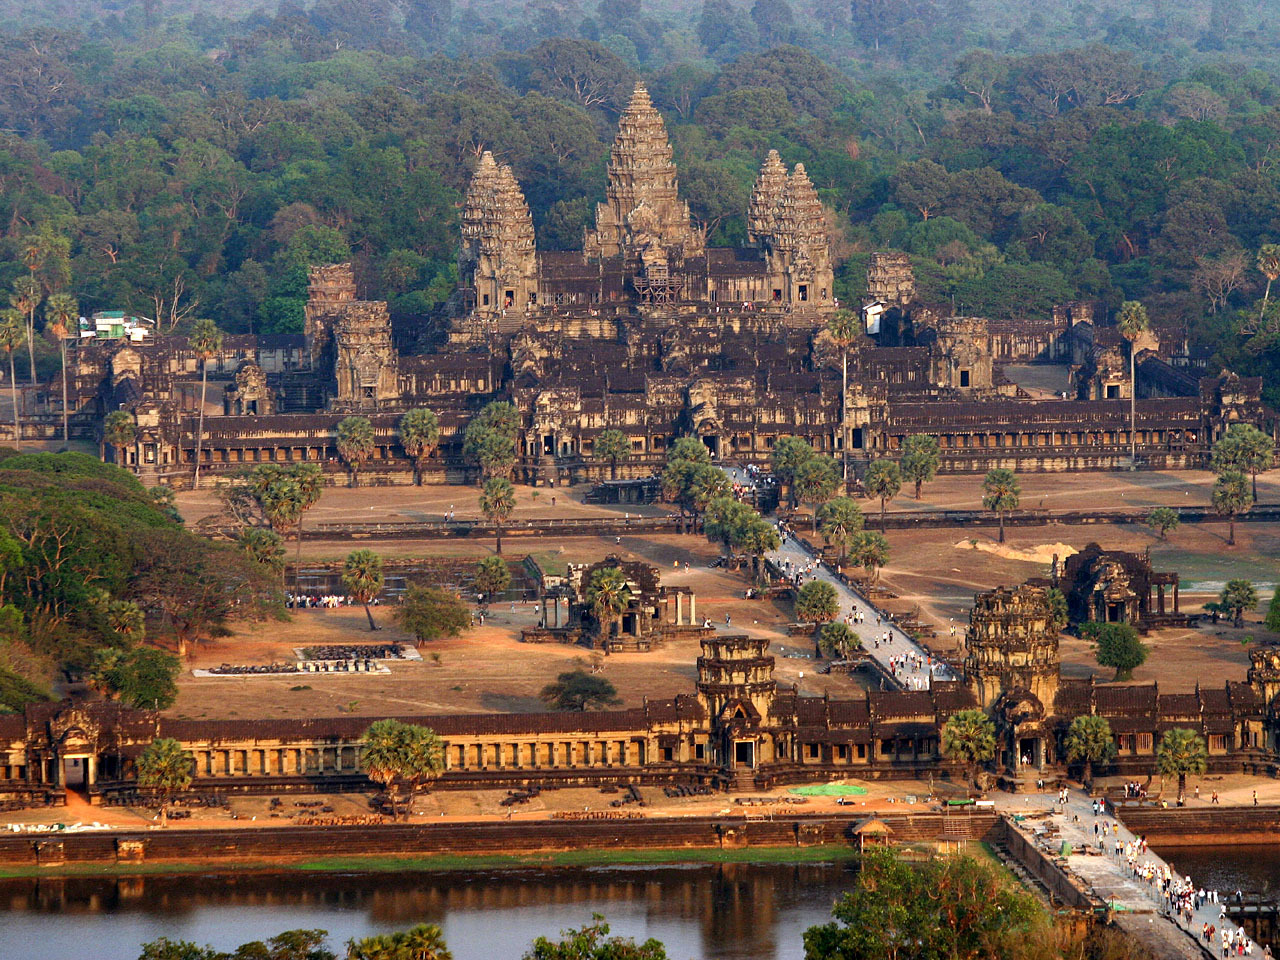 Mystery of Angkor Wat's huge stones solved - CBS News